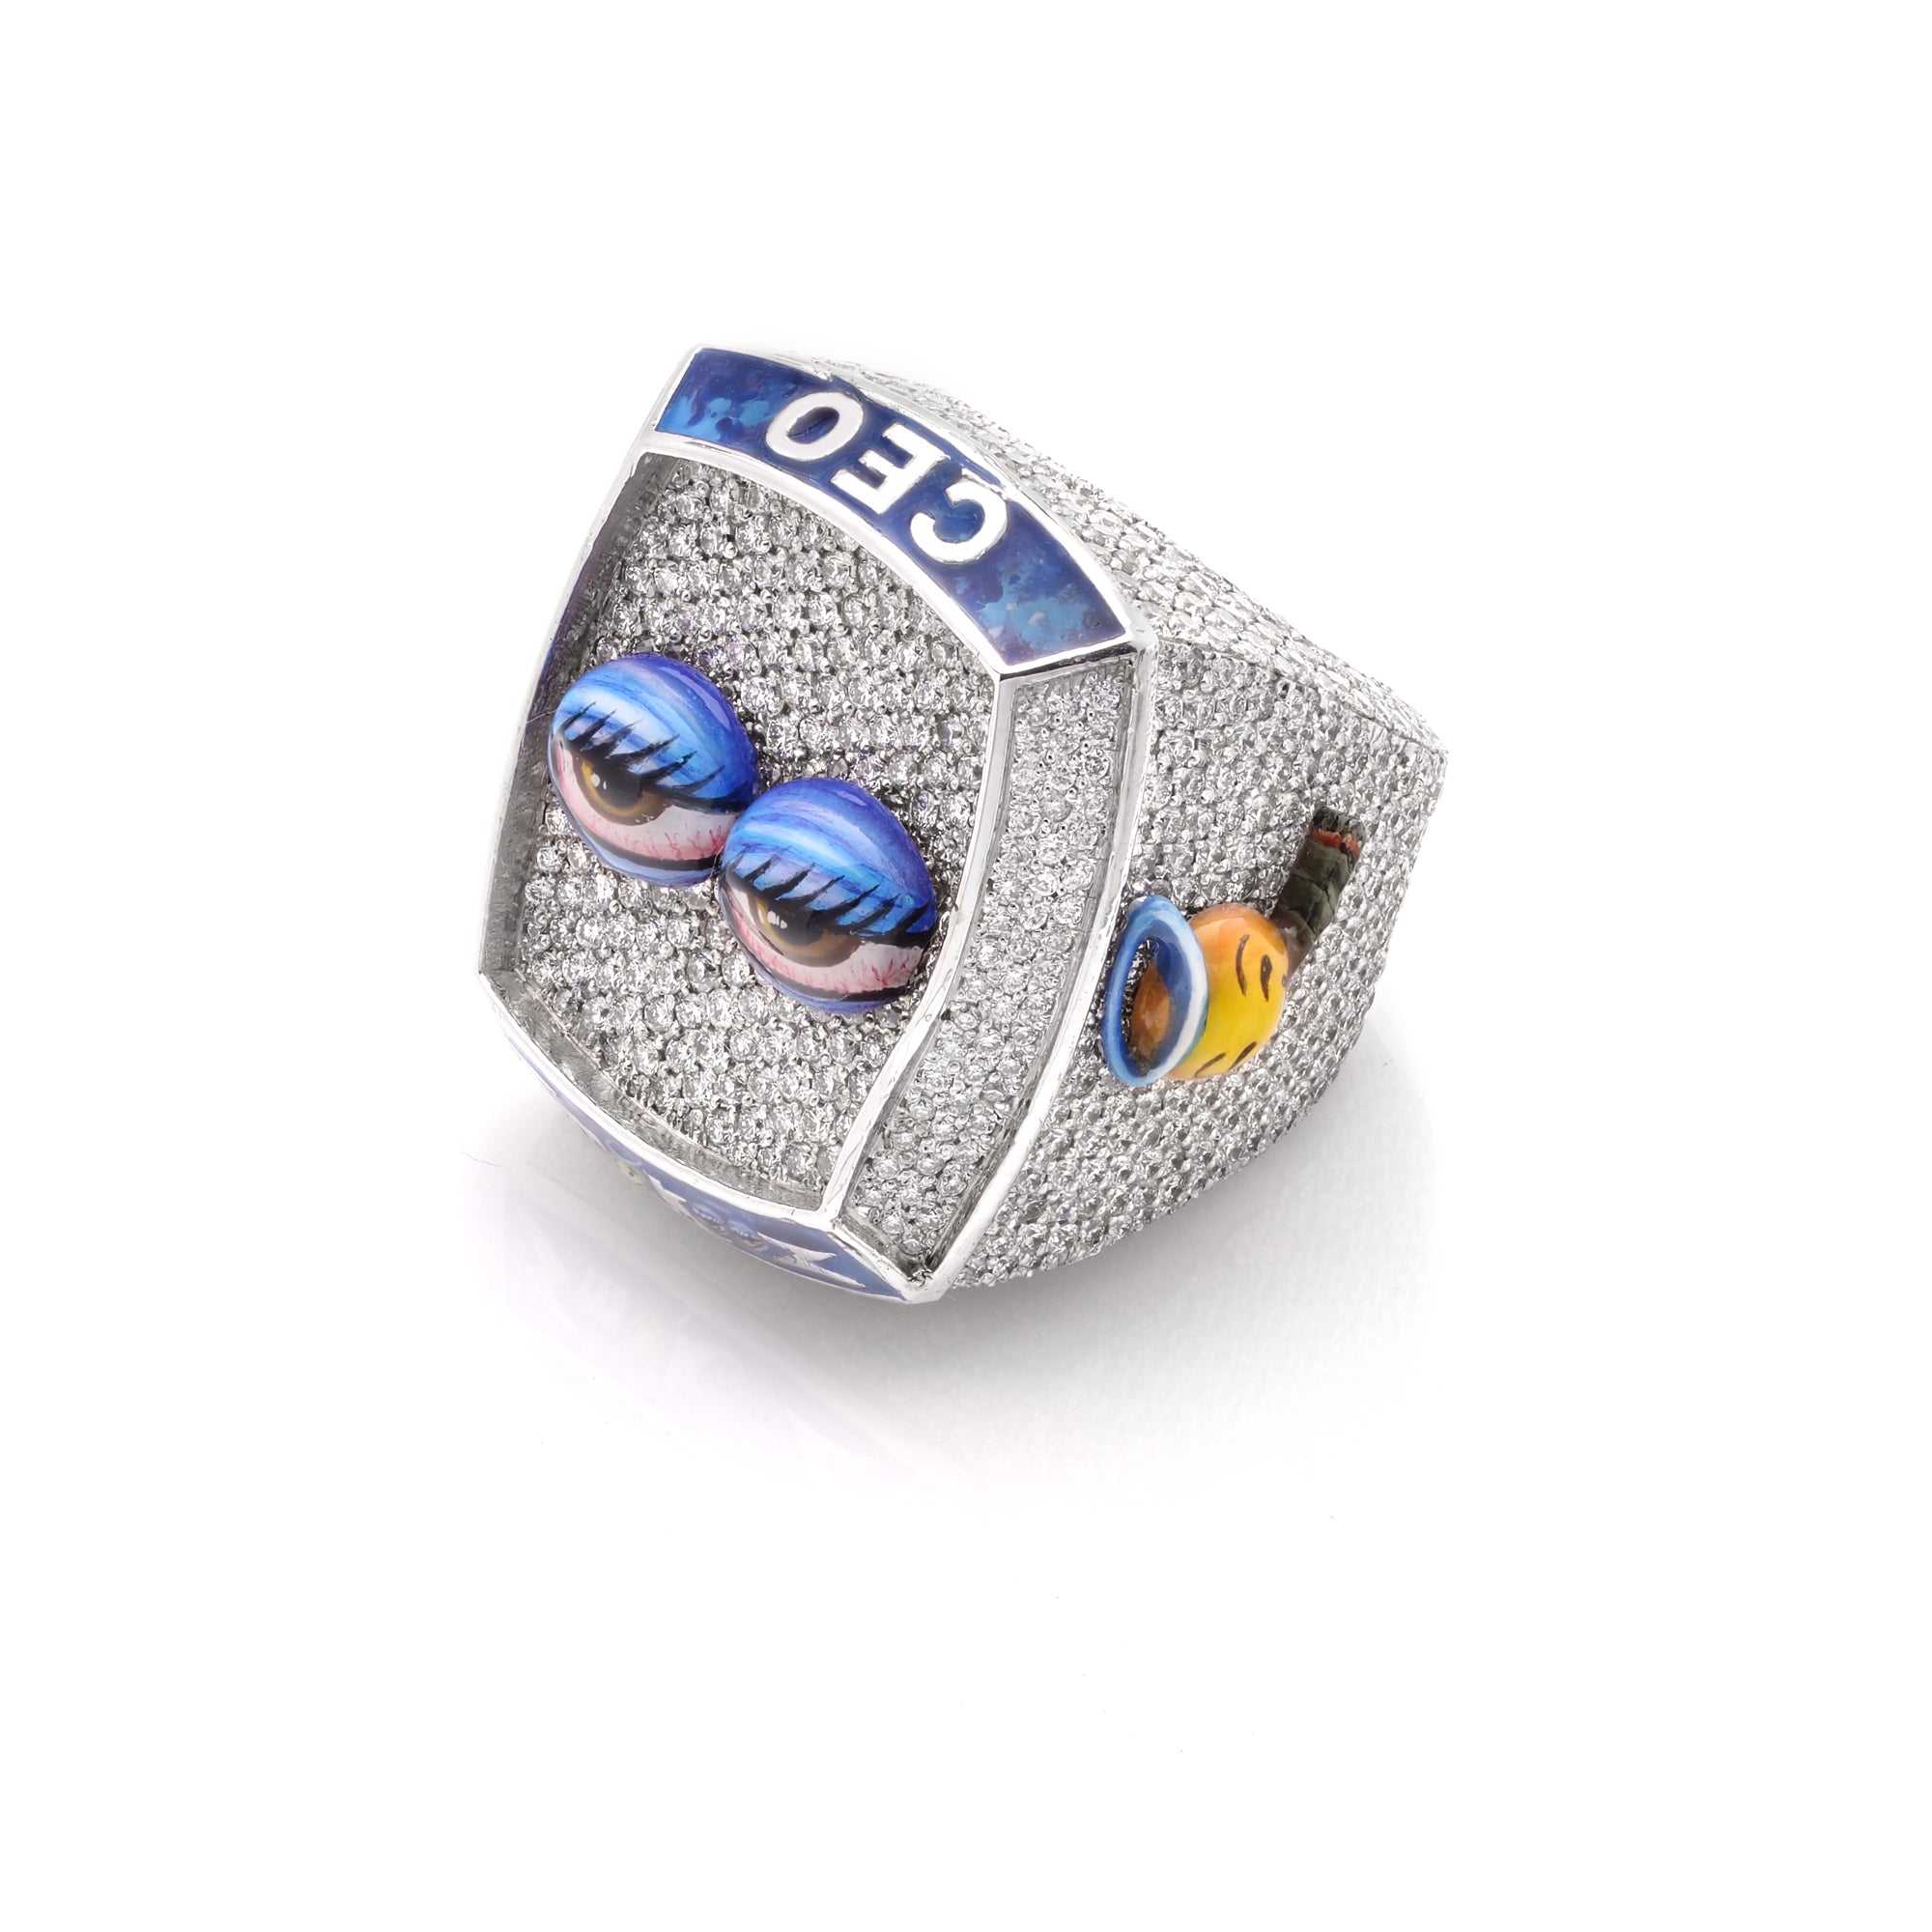 Ceo ring